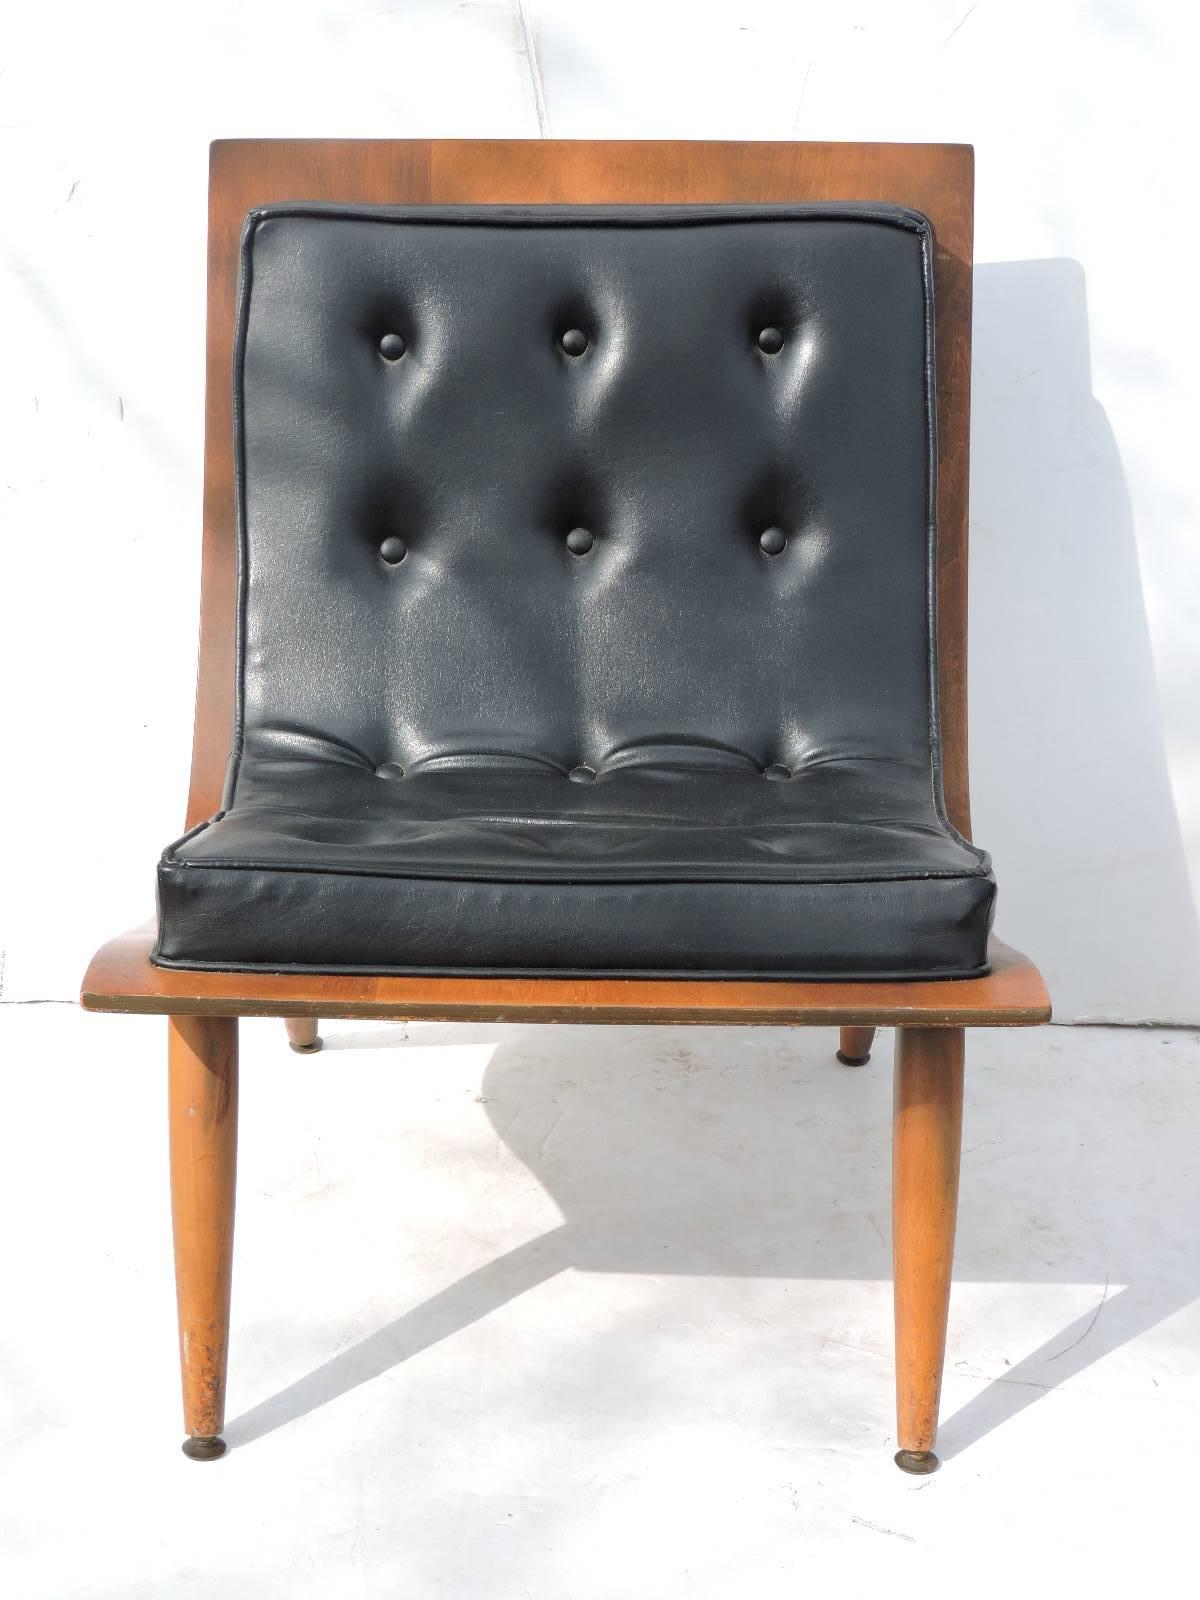 A pair of mid-20th century modern bentwood and button tufted black vinyl scoop lounge chairs manufactured by Carter Brothers in all original condition with nicely aged rich color patina to wood.